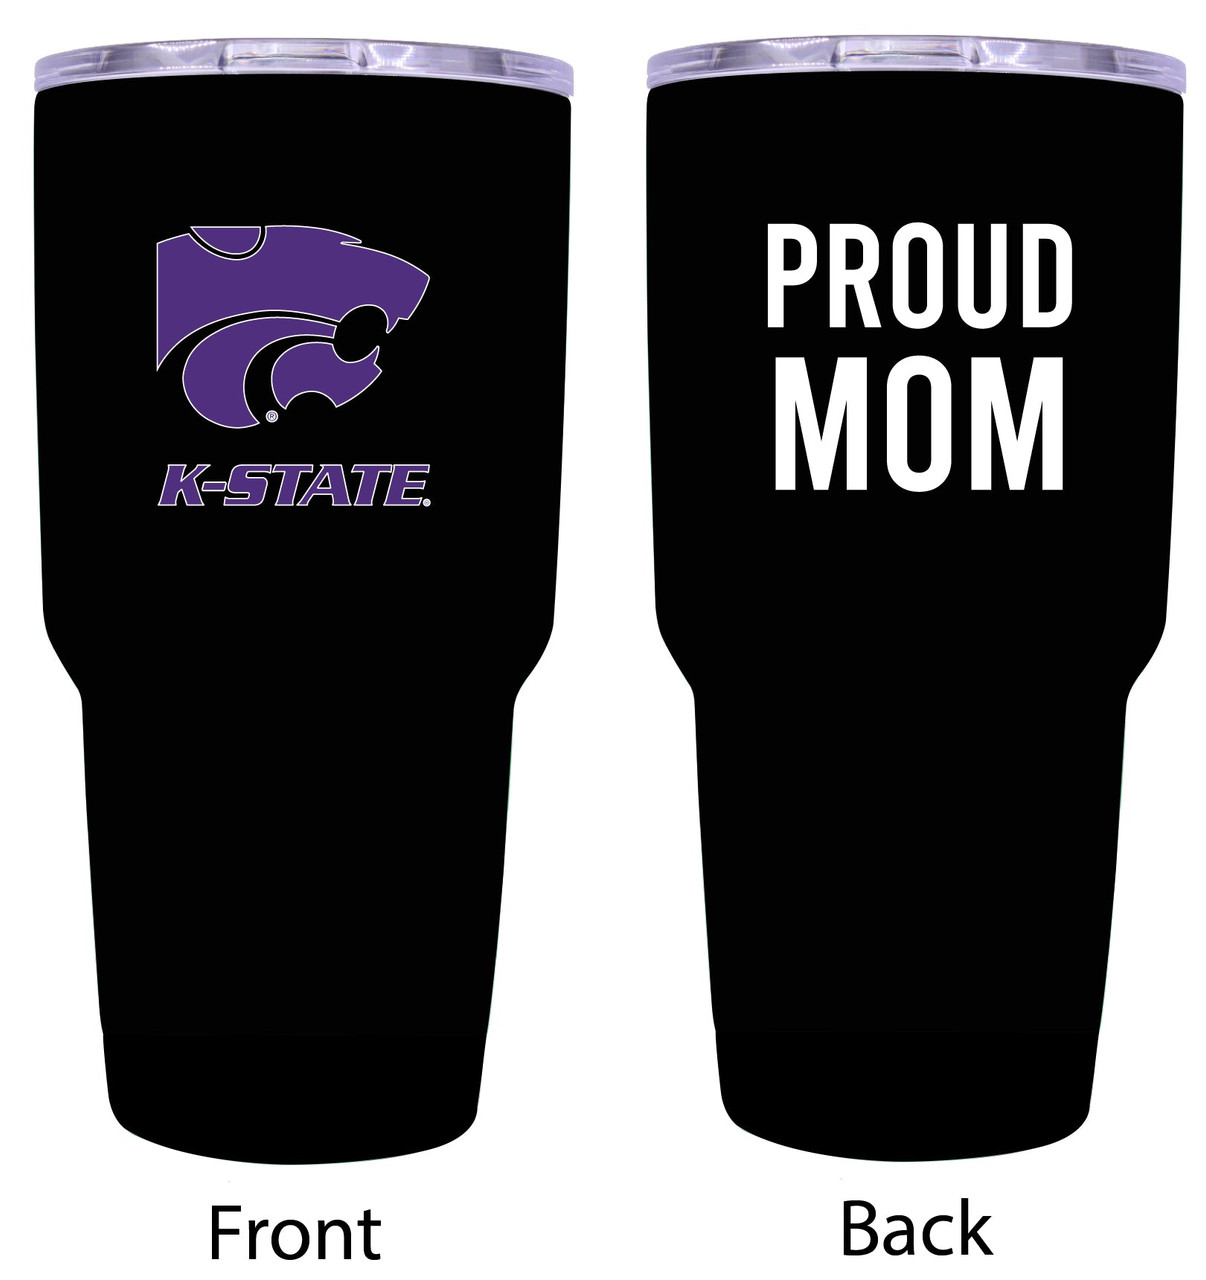 Kansas State Wildcats Proud Mom 24 oz Insulated Stainless Steel Tumblers Black.